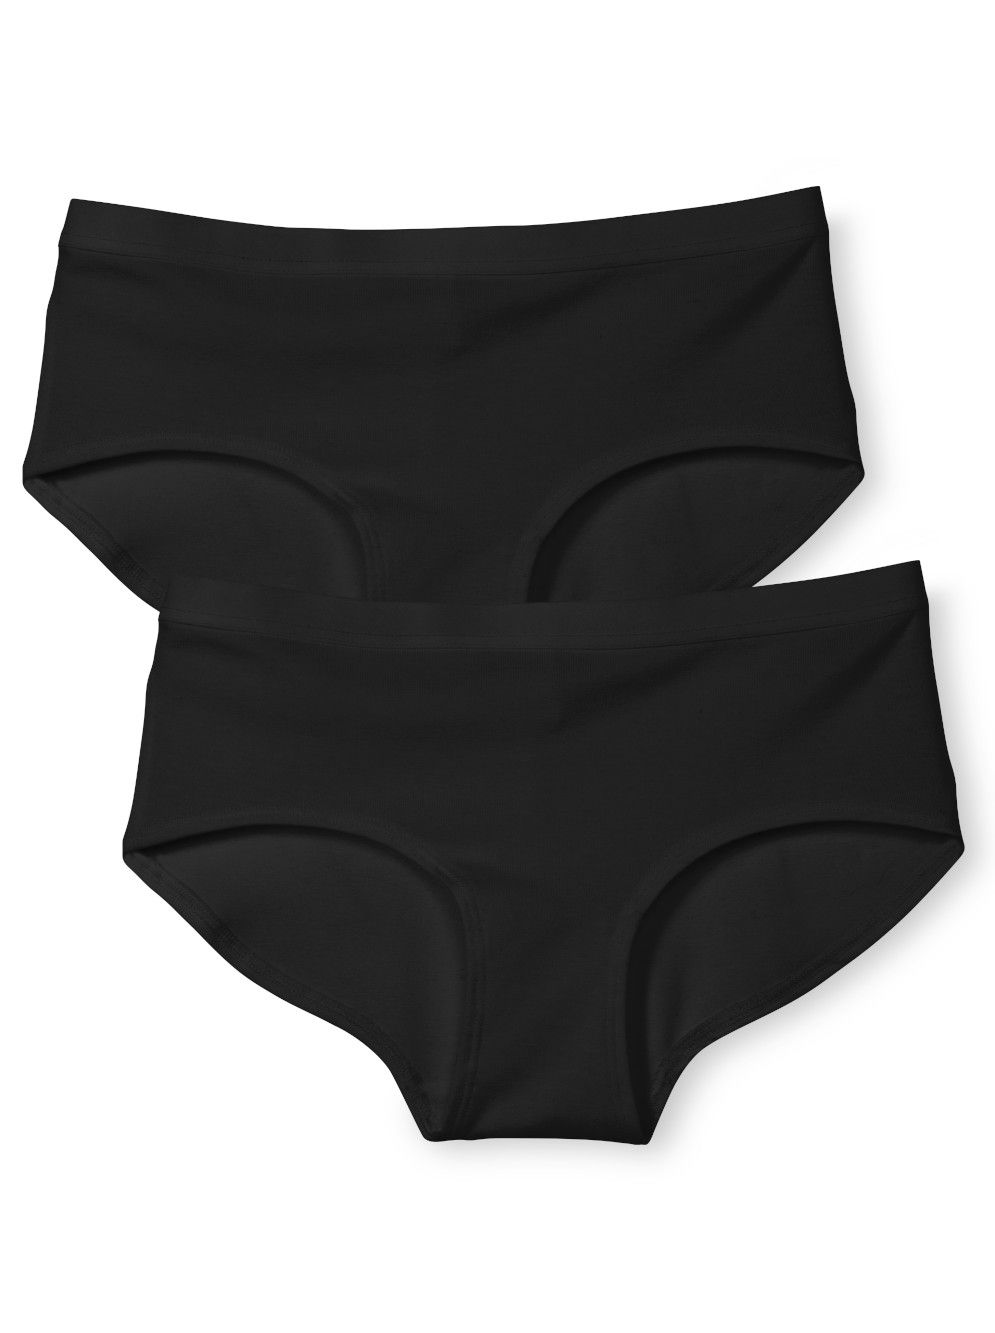 Calida Benefit Women panty Double pack in black color